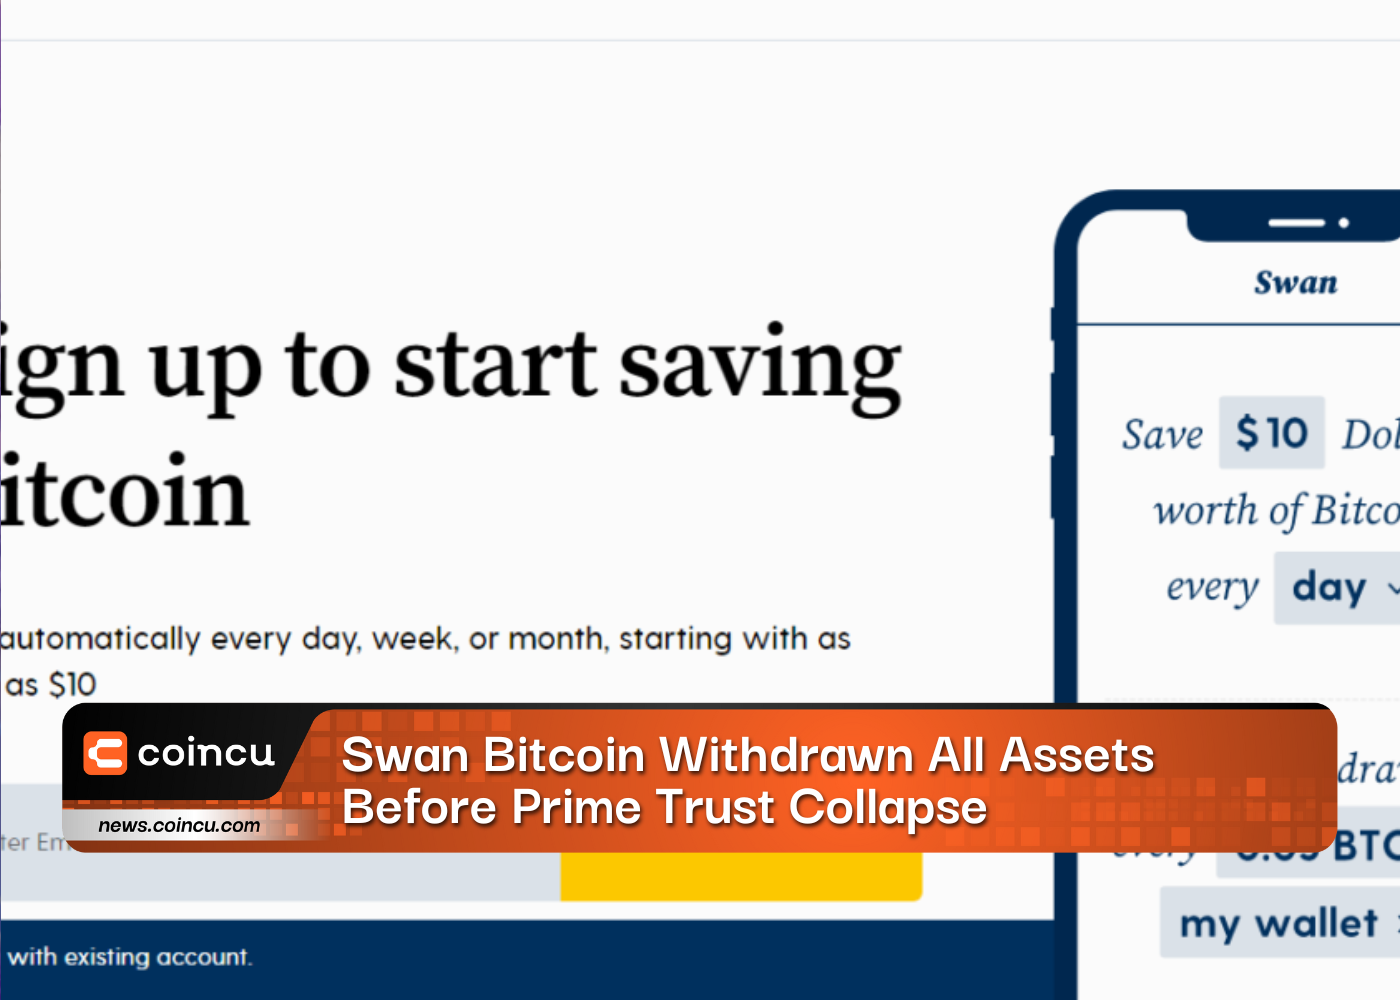 Swan Bitcoin Withdrawn All Assets Before Prime Trust Collapse